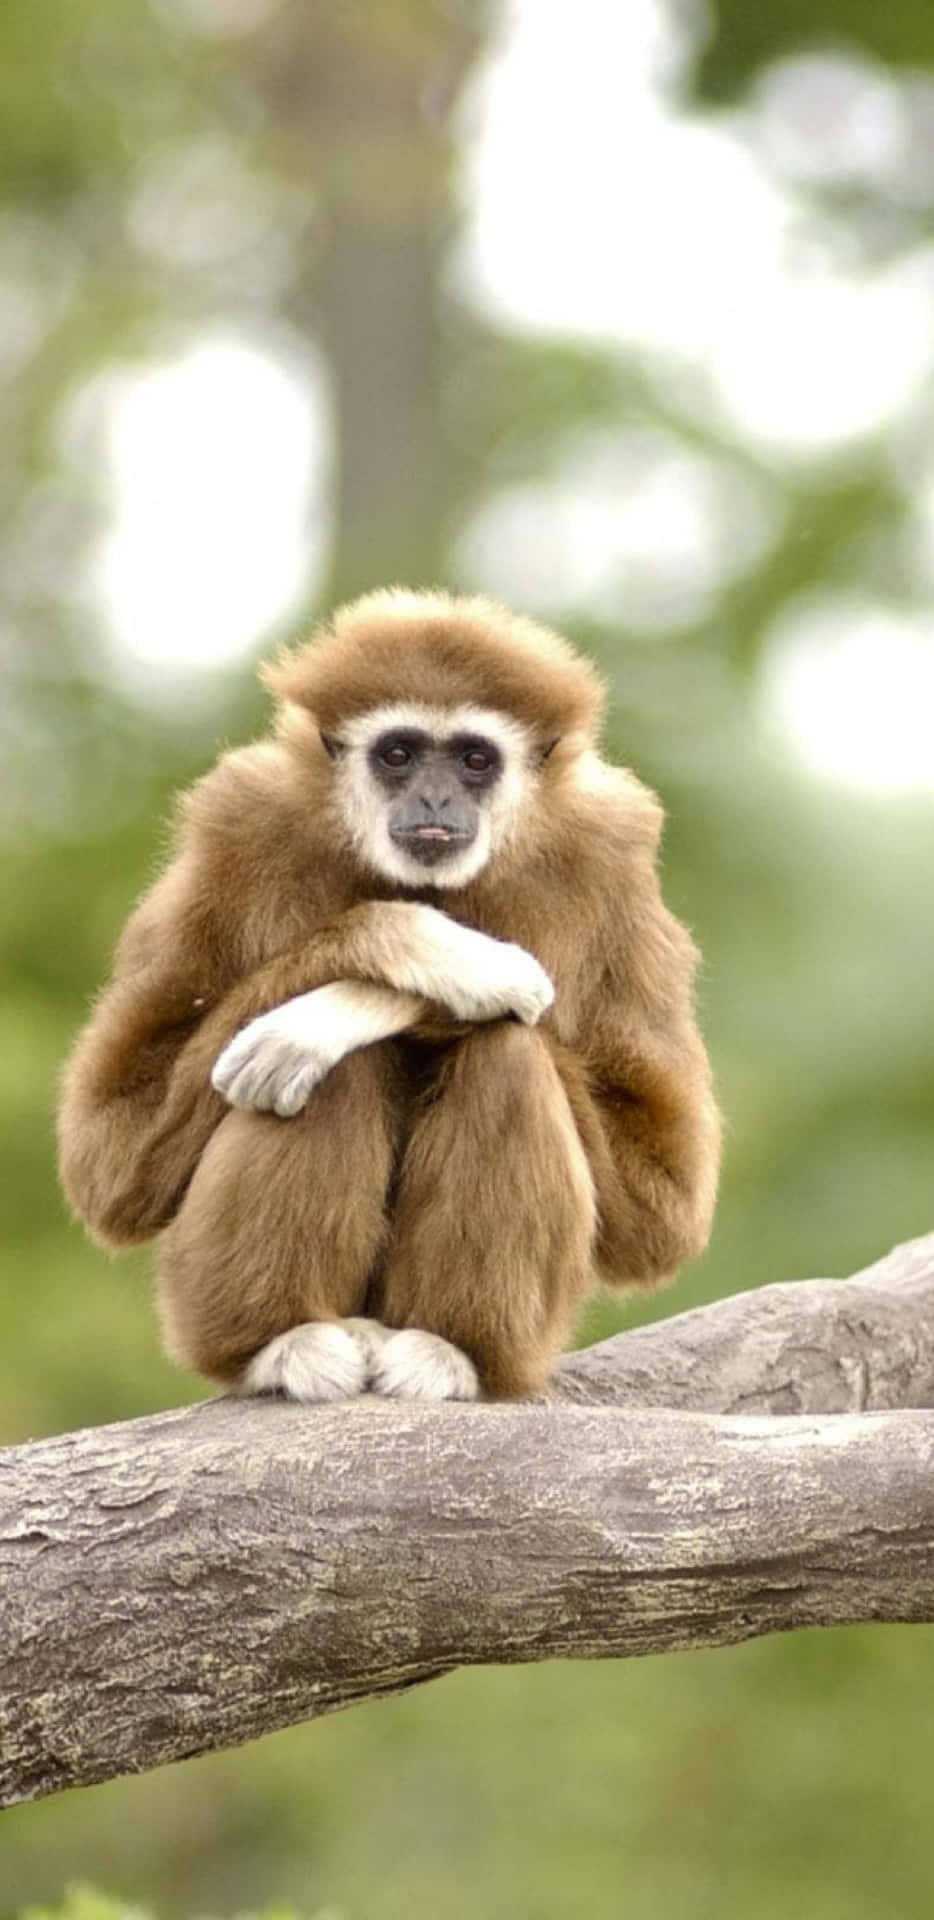 A Monkey Sitting On A Branch With Its Hands On Its Face